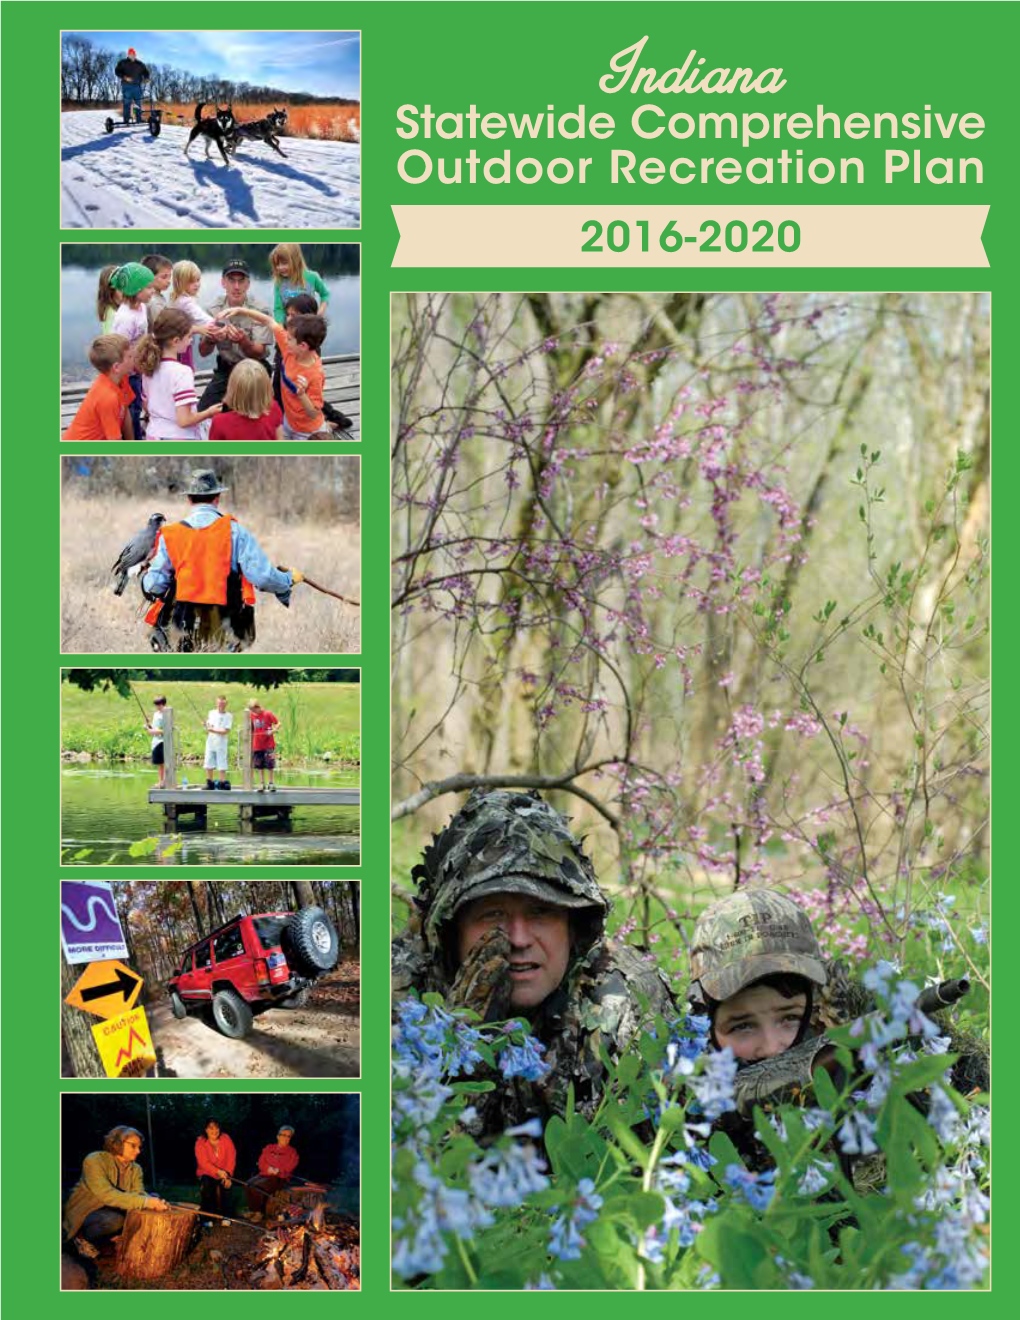 Indiana Statewide Outdoor Recreation Plan 2016-2020